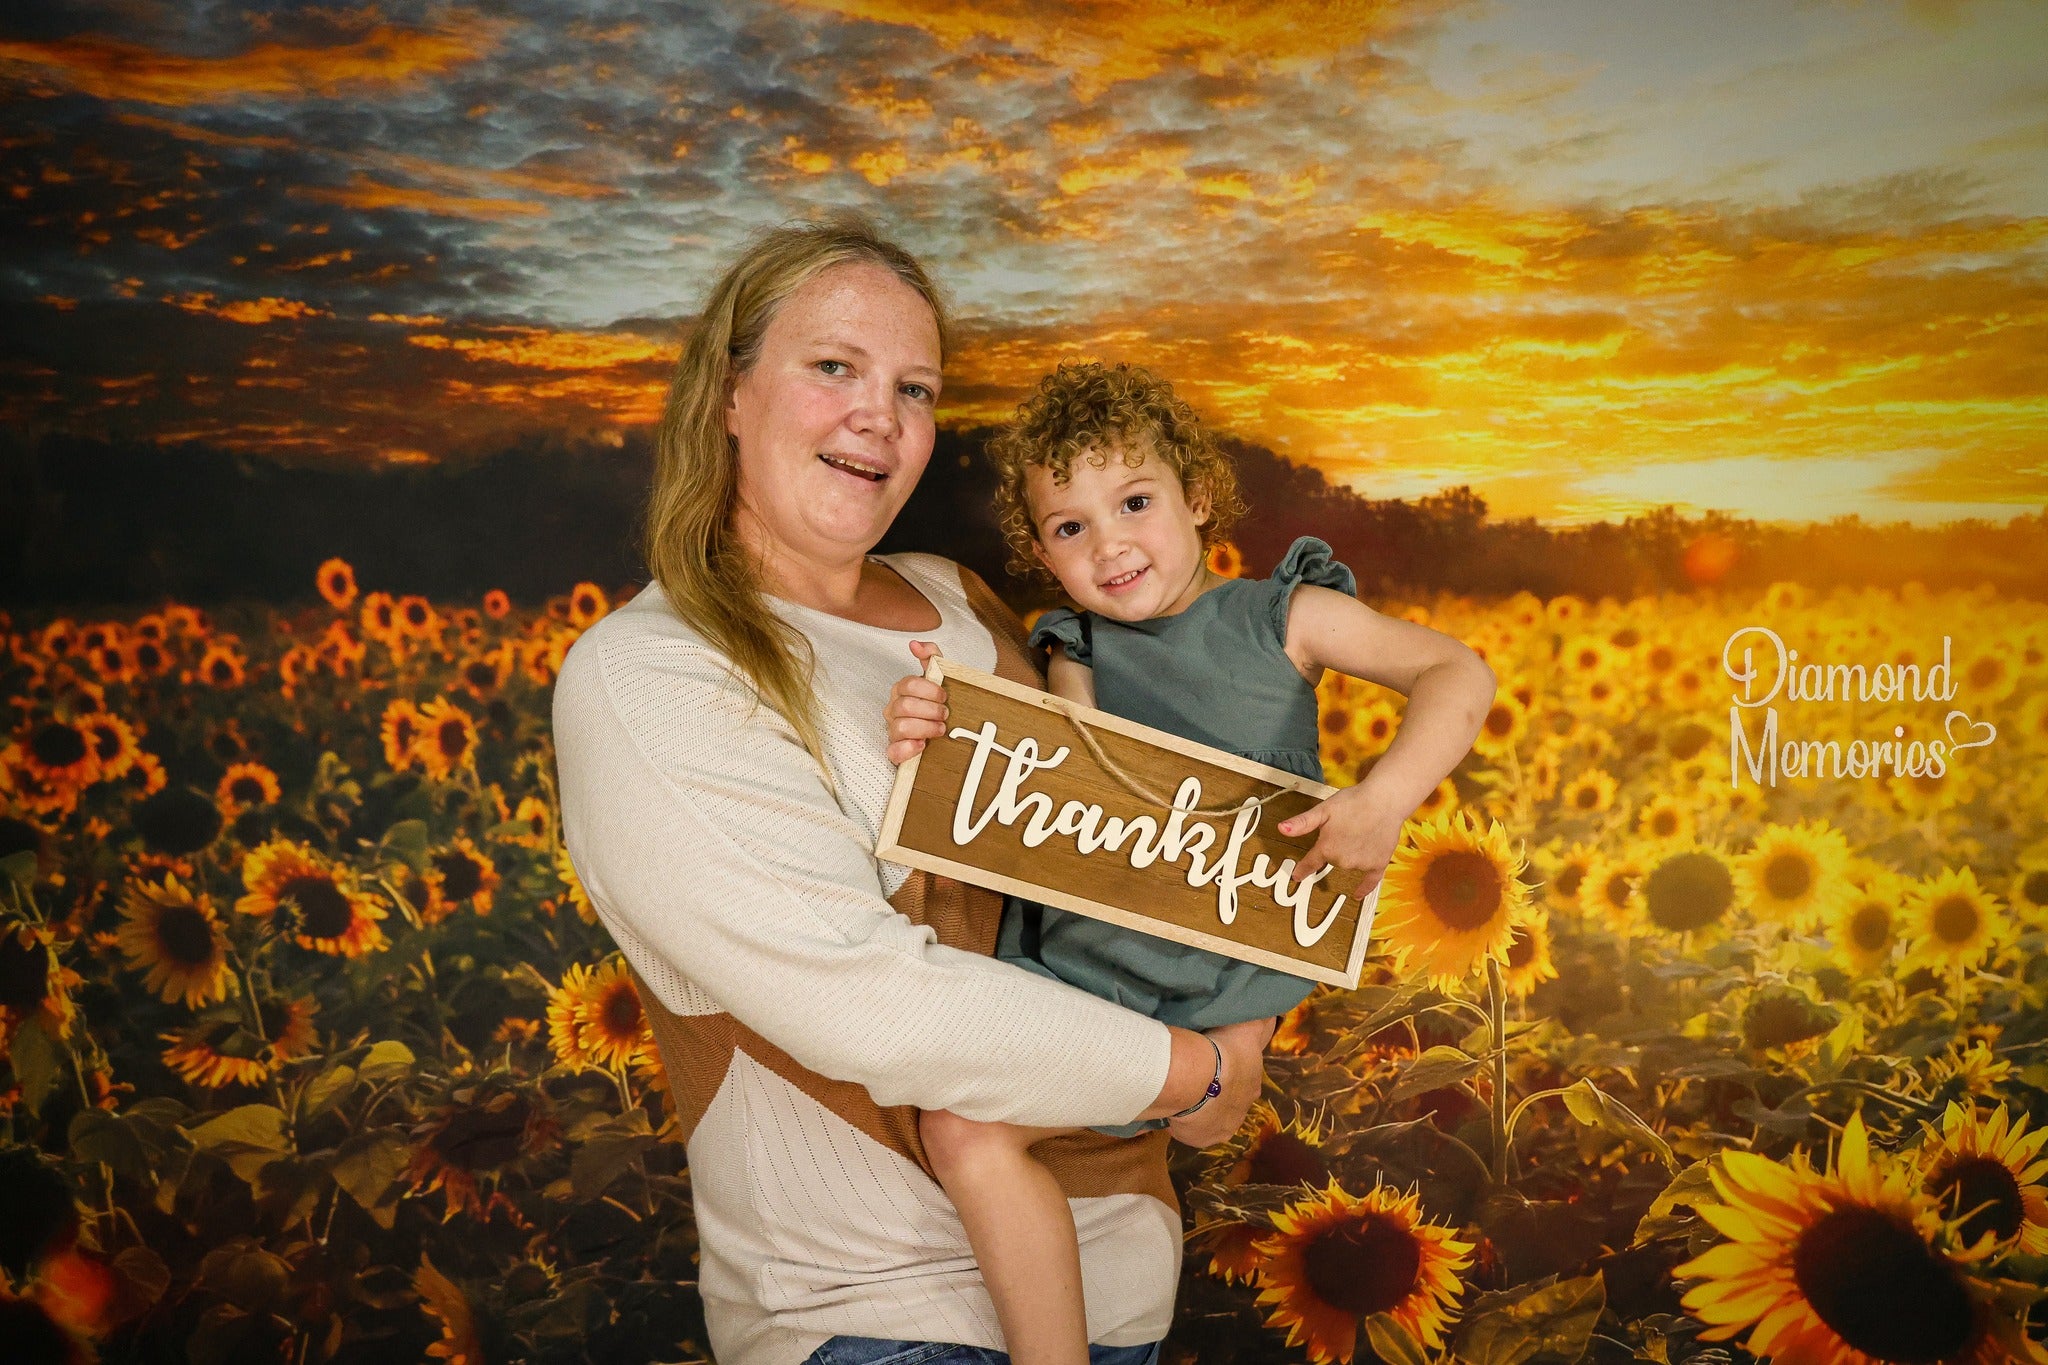 Kate Sunflower Backdrop Autumn Outdoor Designed by Chain Photography